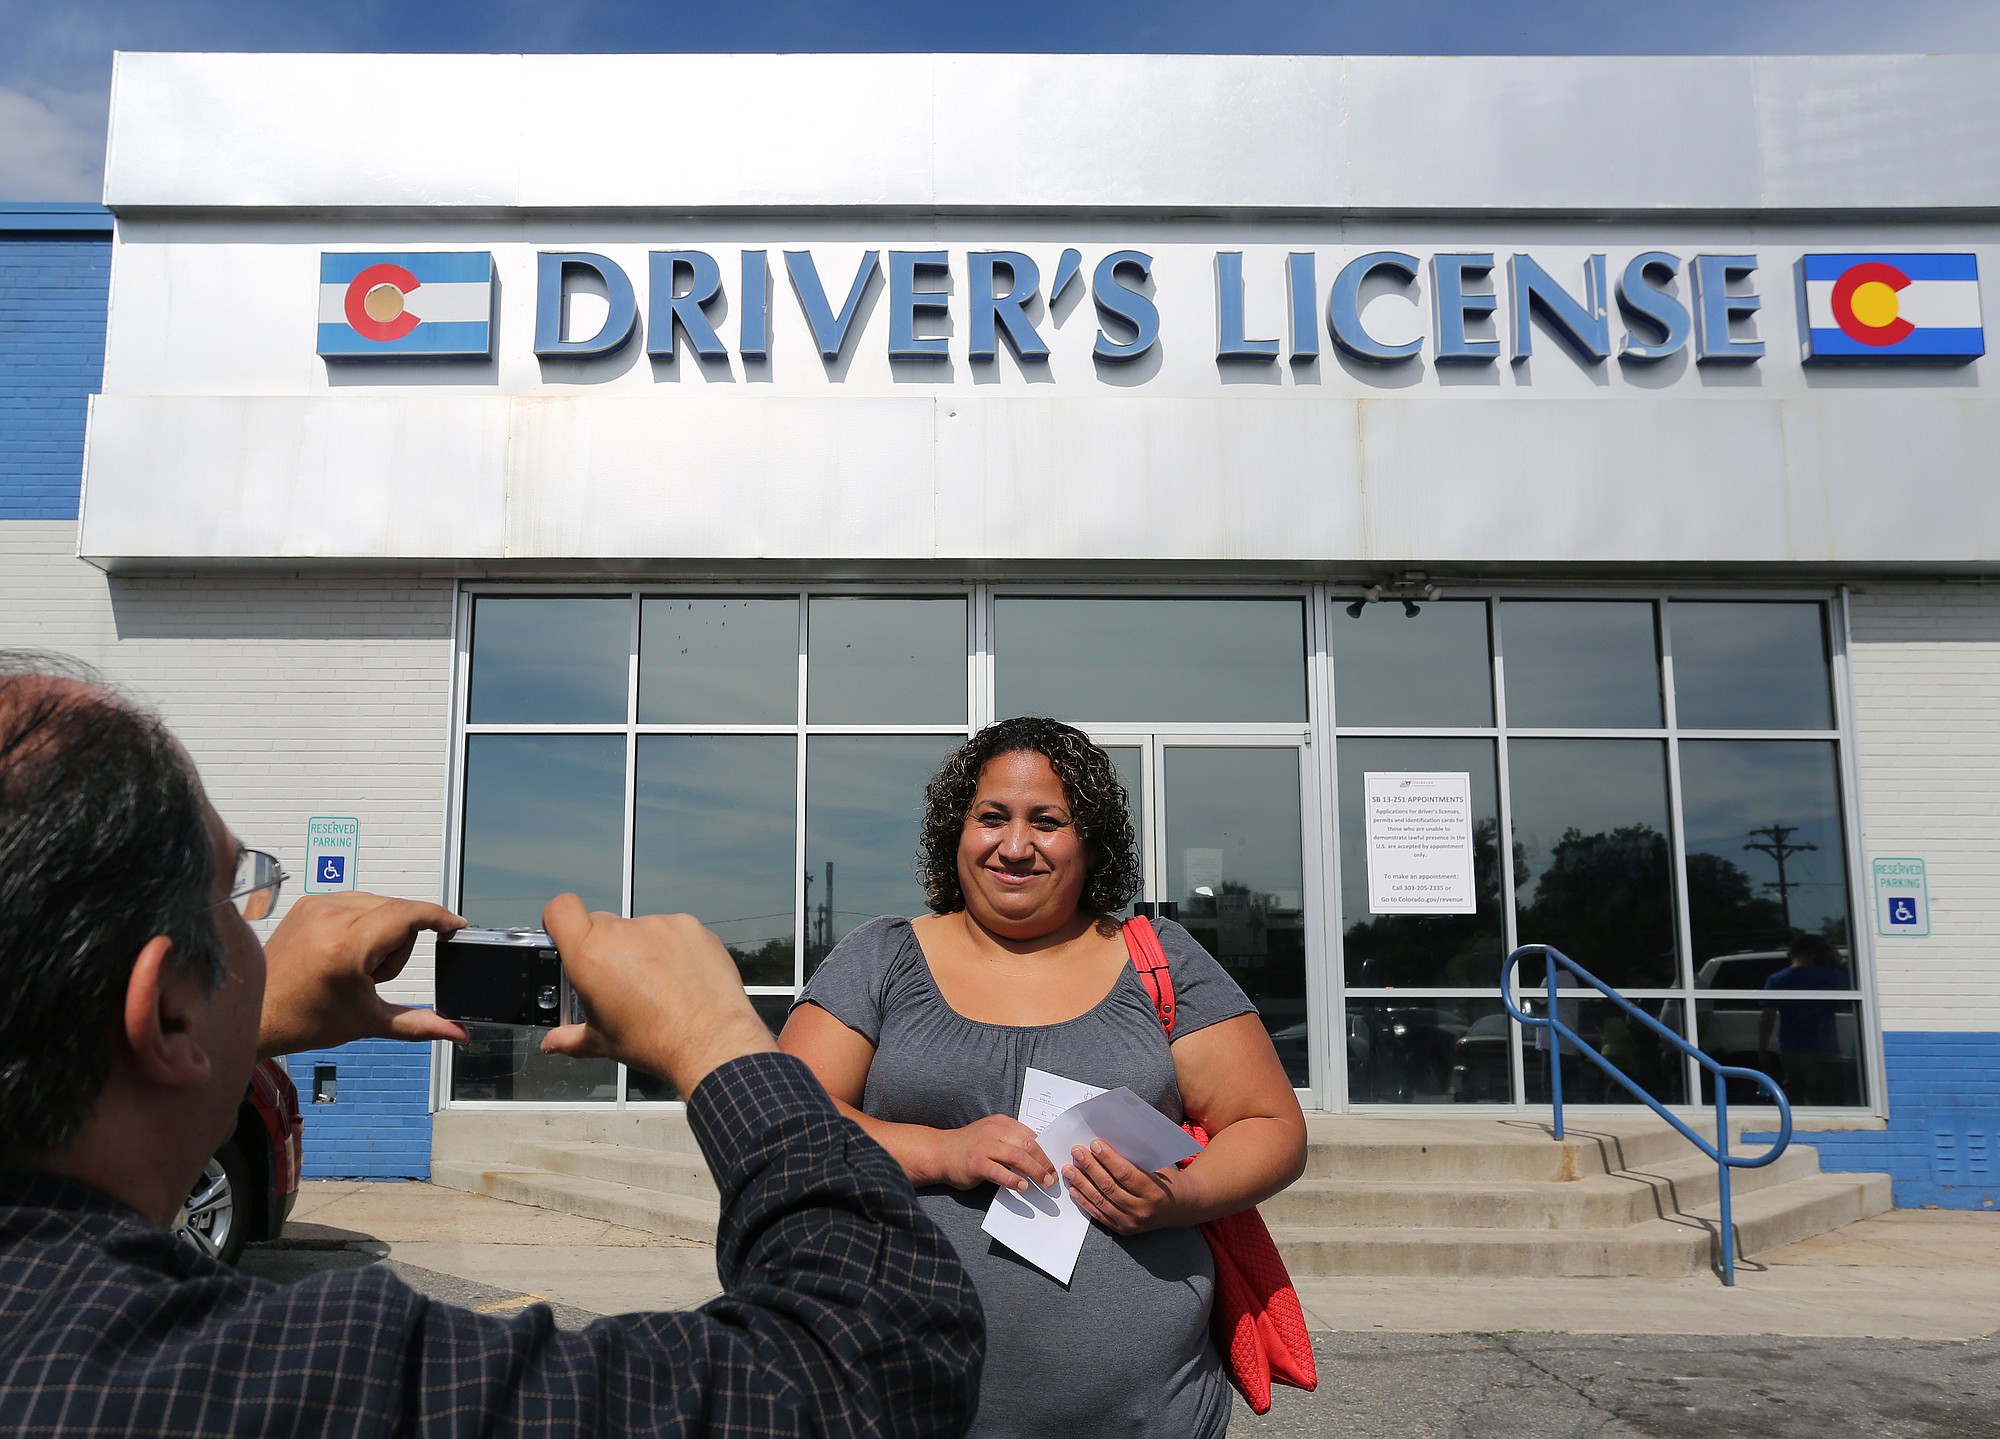 Immigrant and longtime resident in the United States Rosalva Mireles is photographed by Jesus Sanchez of Spanish language newspaper El Commercio, after Mireles was processed for her permanent driver's license, and received a temporary license, at a Department of Motor Vehicles office, in Denver, Friday Aug. 1, 2014. Colorado began issuing driver's licenses and identification cards on Aug. 1, 2014 to immigrants who are in the country, regardless of legal immigration status.